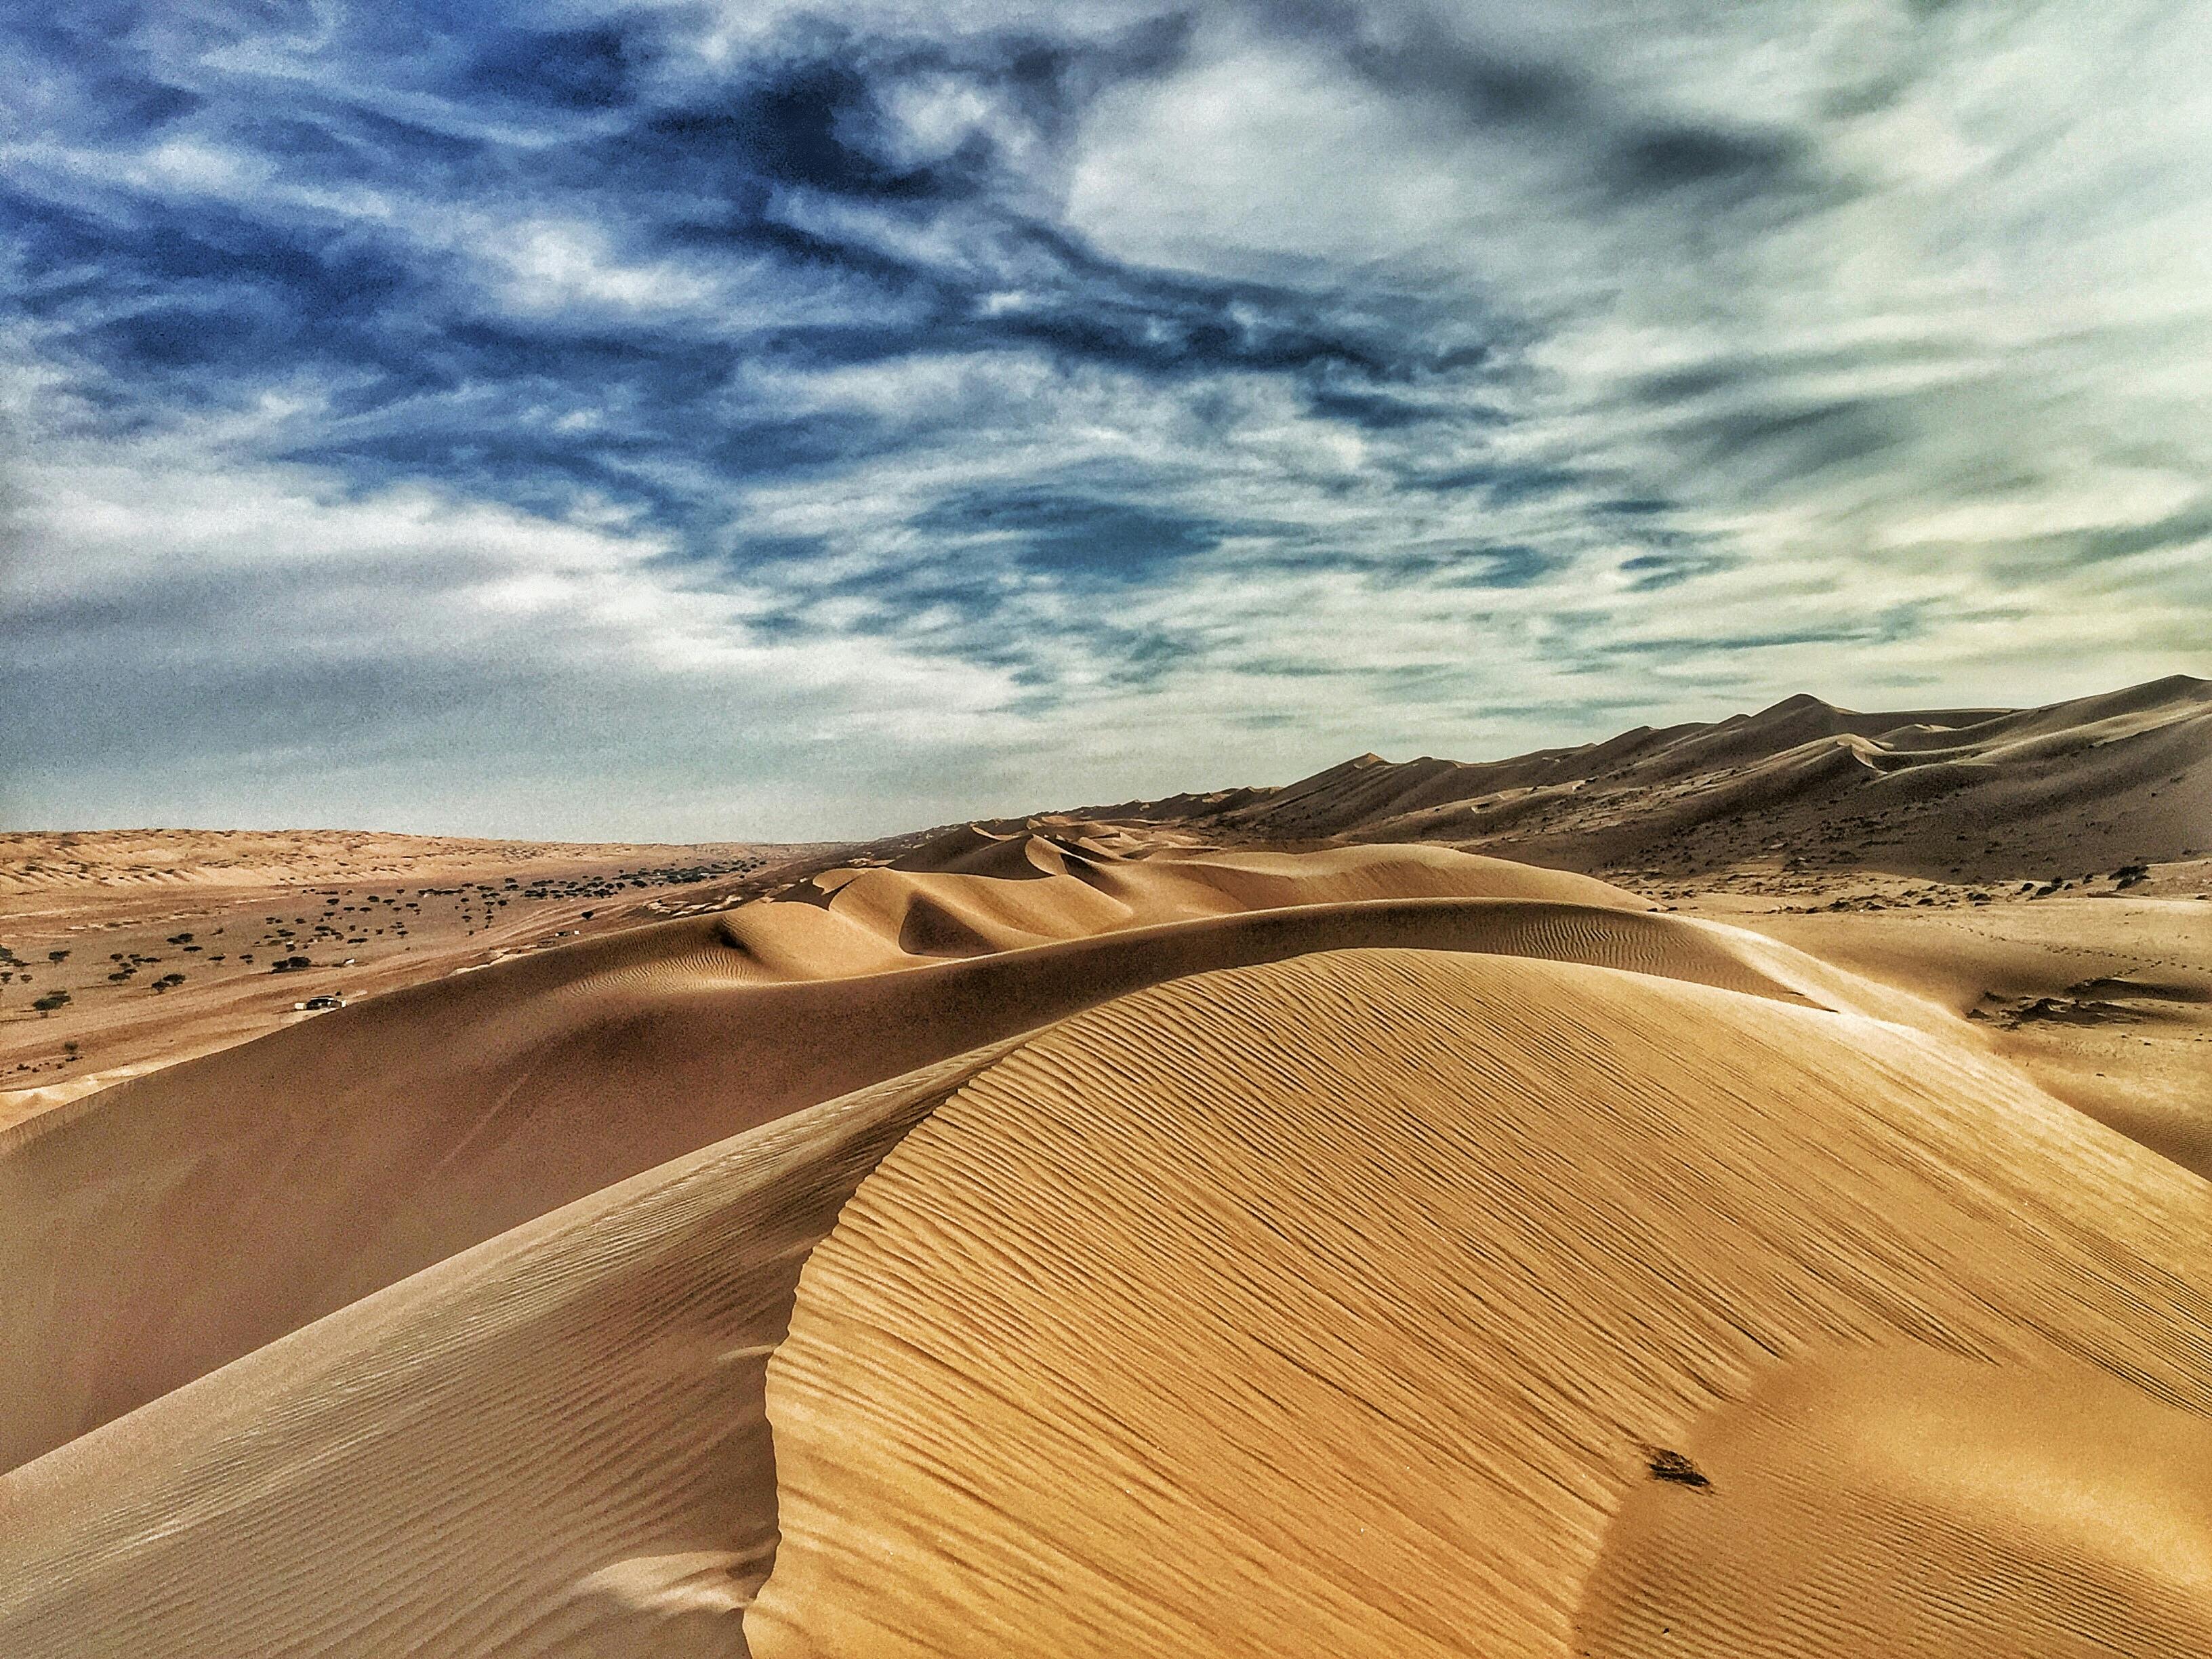 Desert experience - private Wahiba sands full-day tour